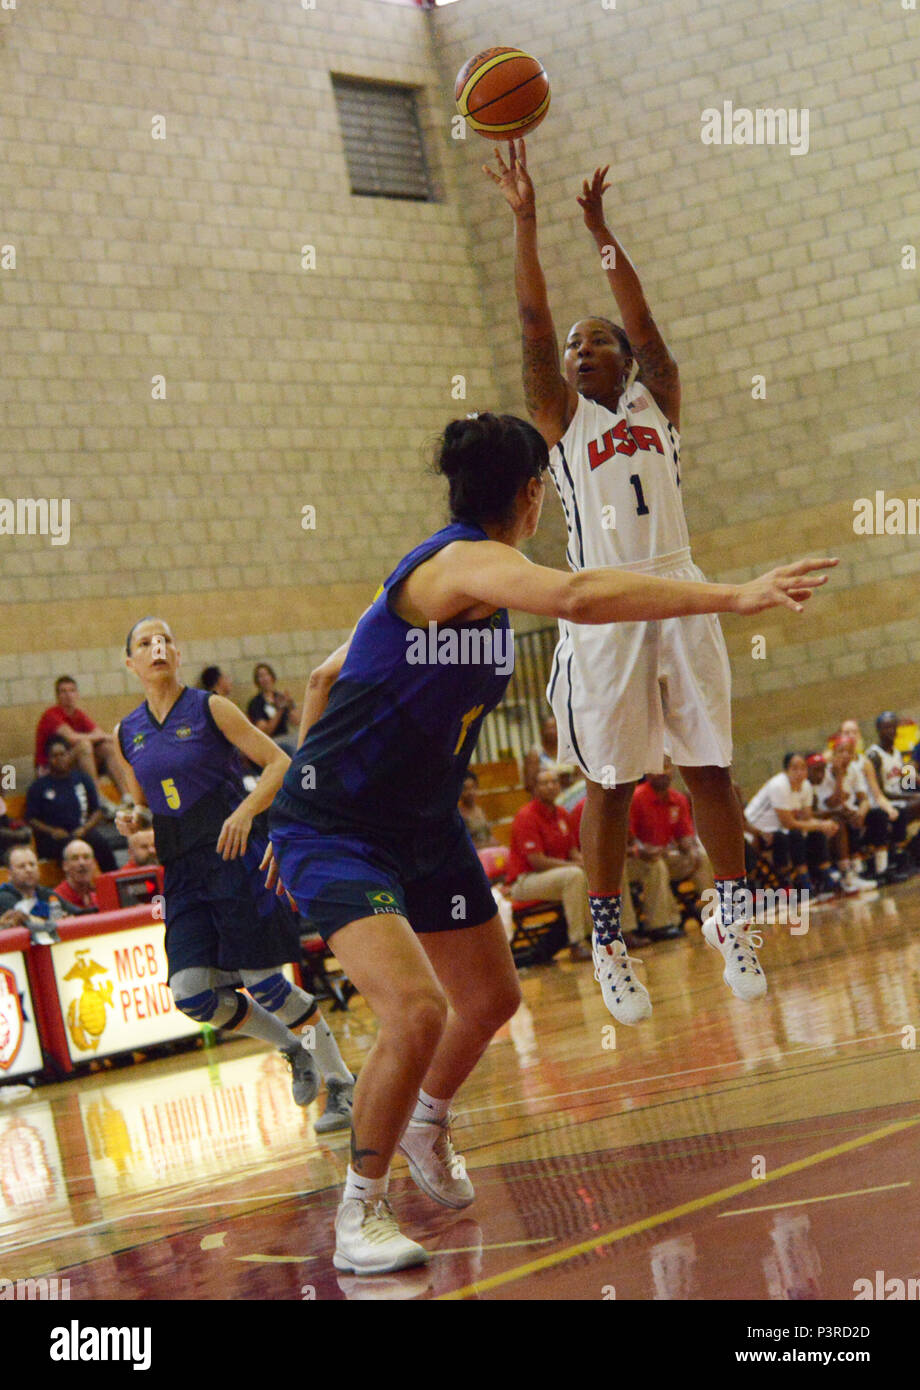 Danielle Deberry takes a jump shot from top of the key during the final  game of